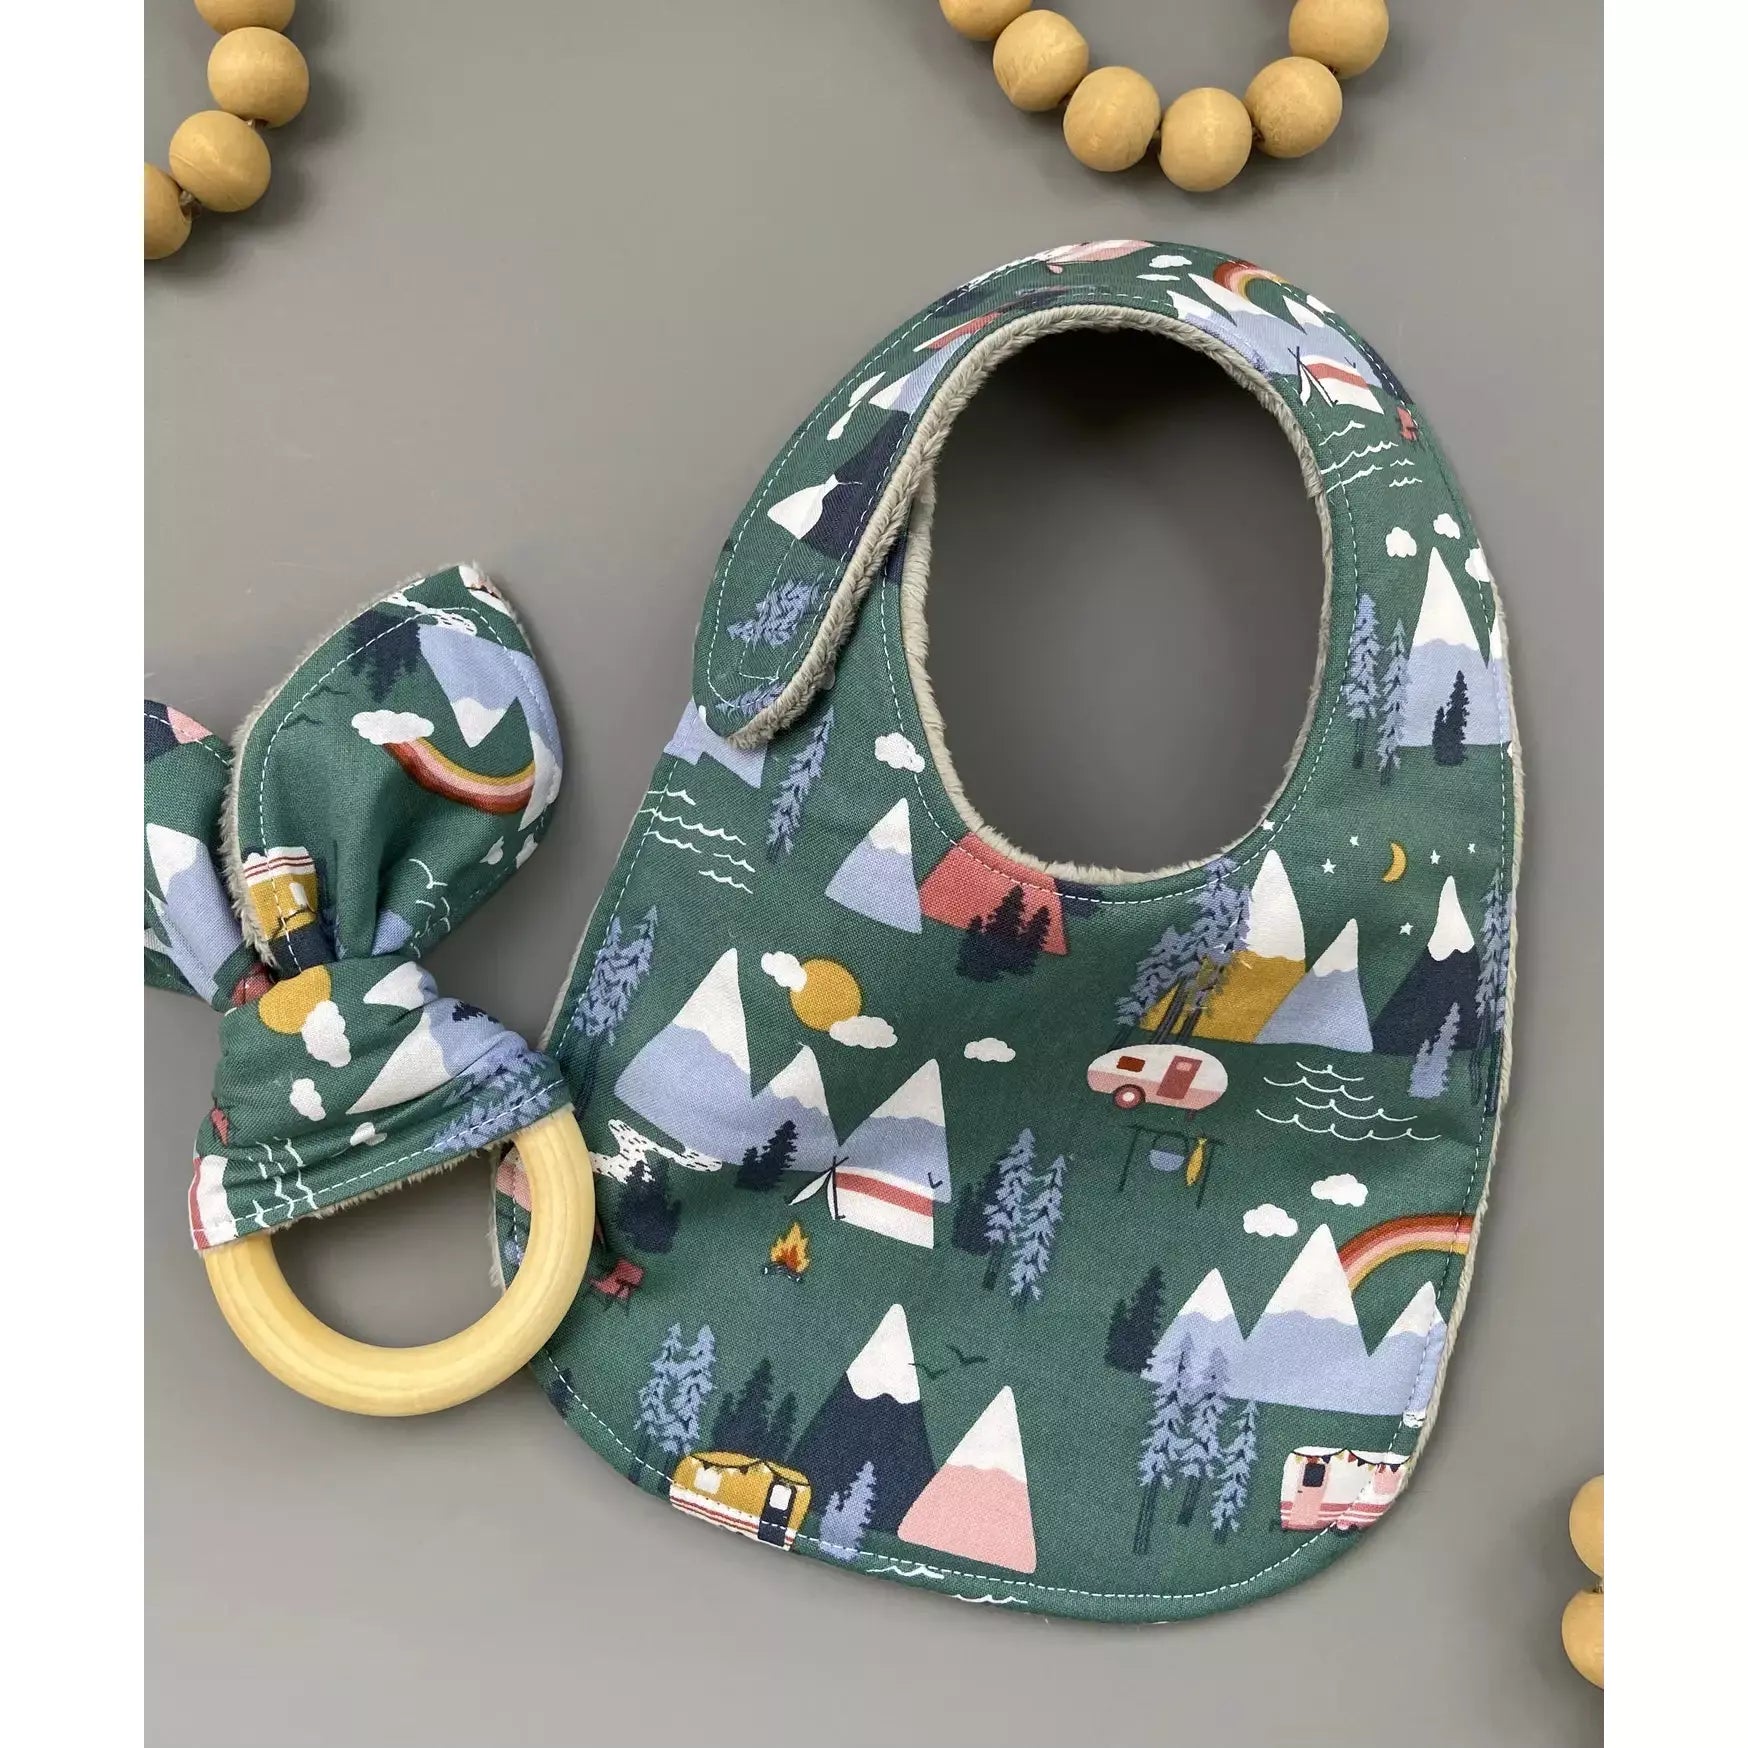 Campers Under the Rainbow Baby Bib and Teether